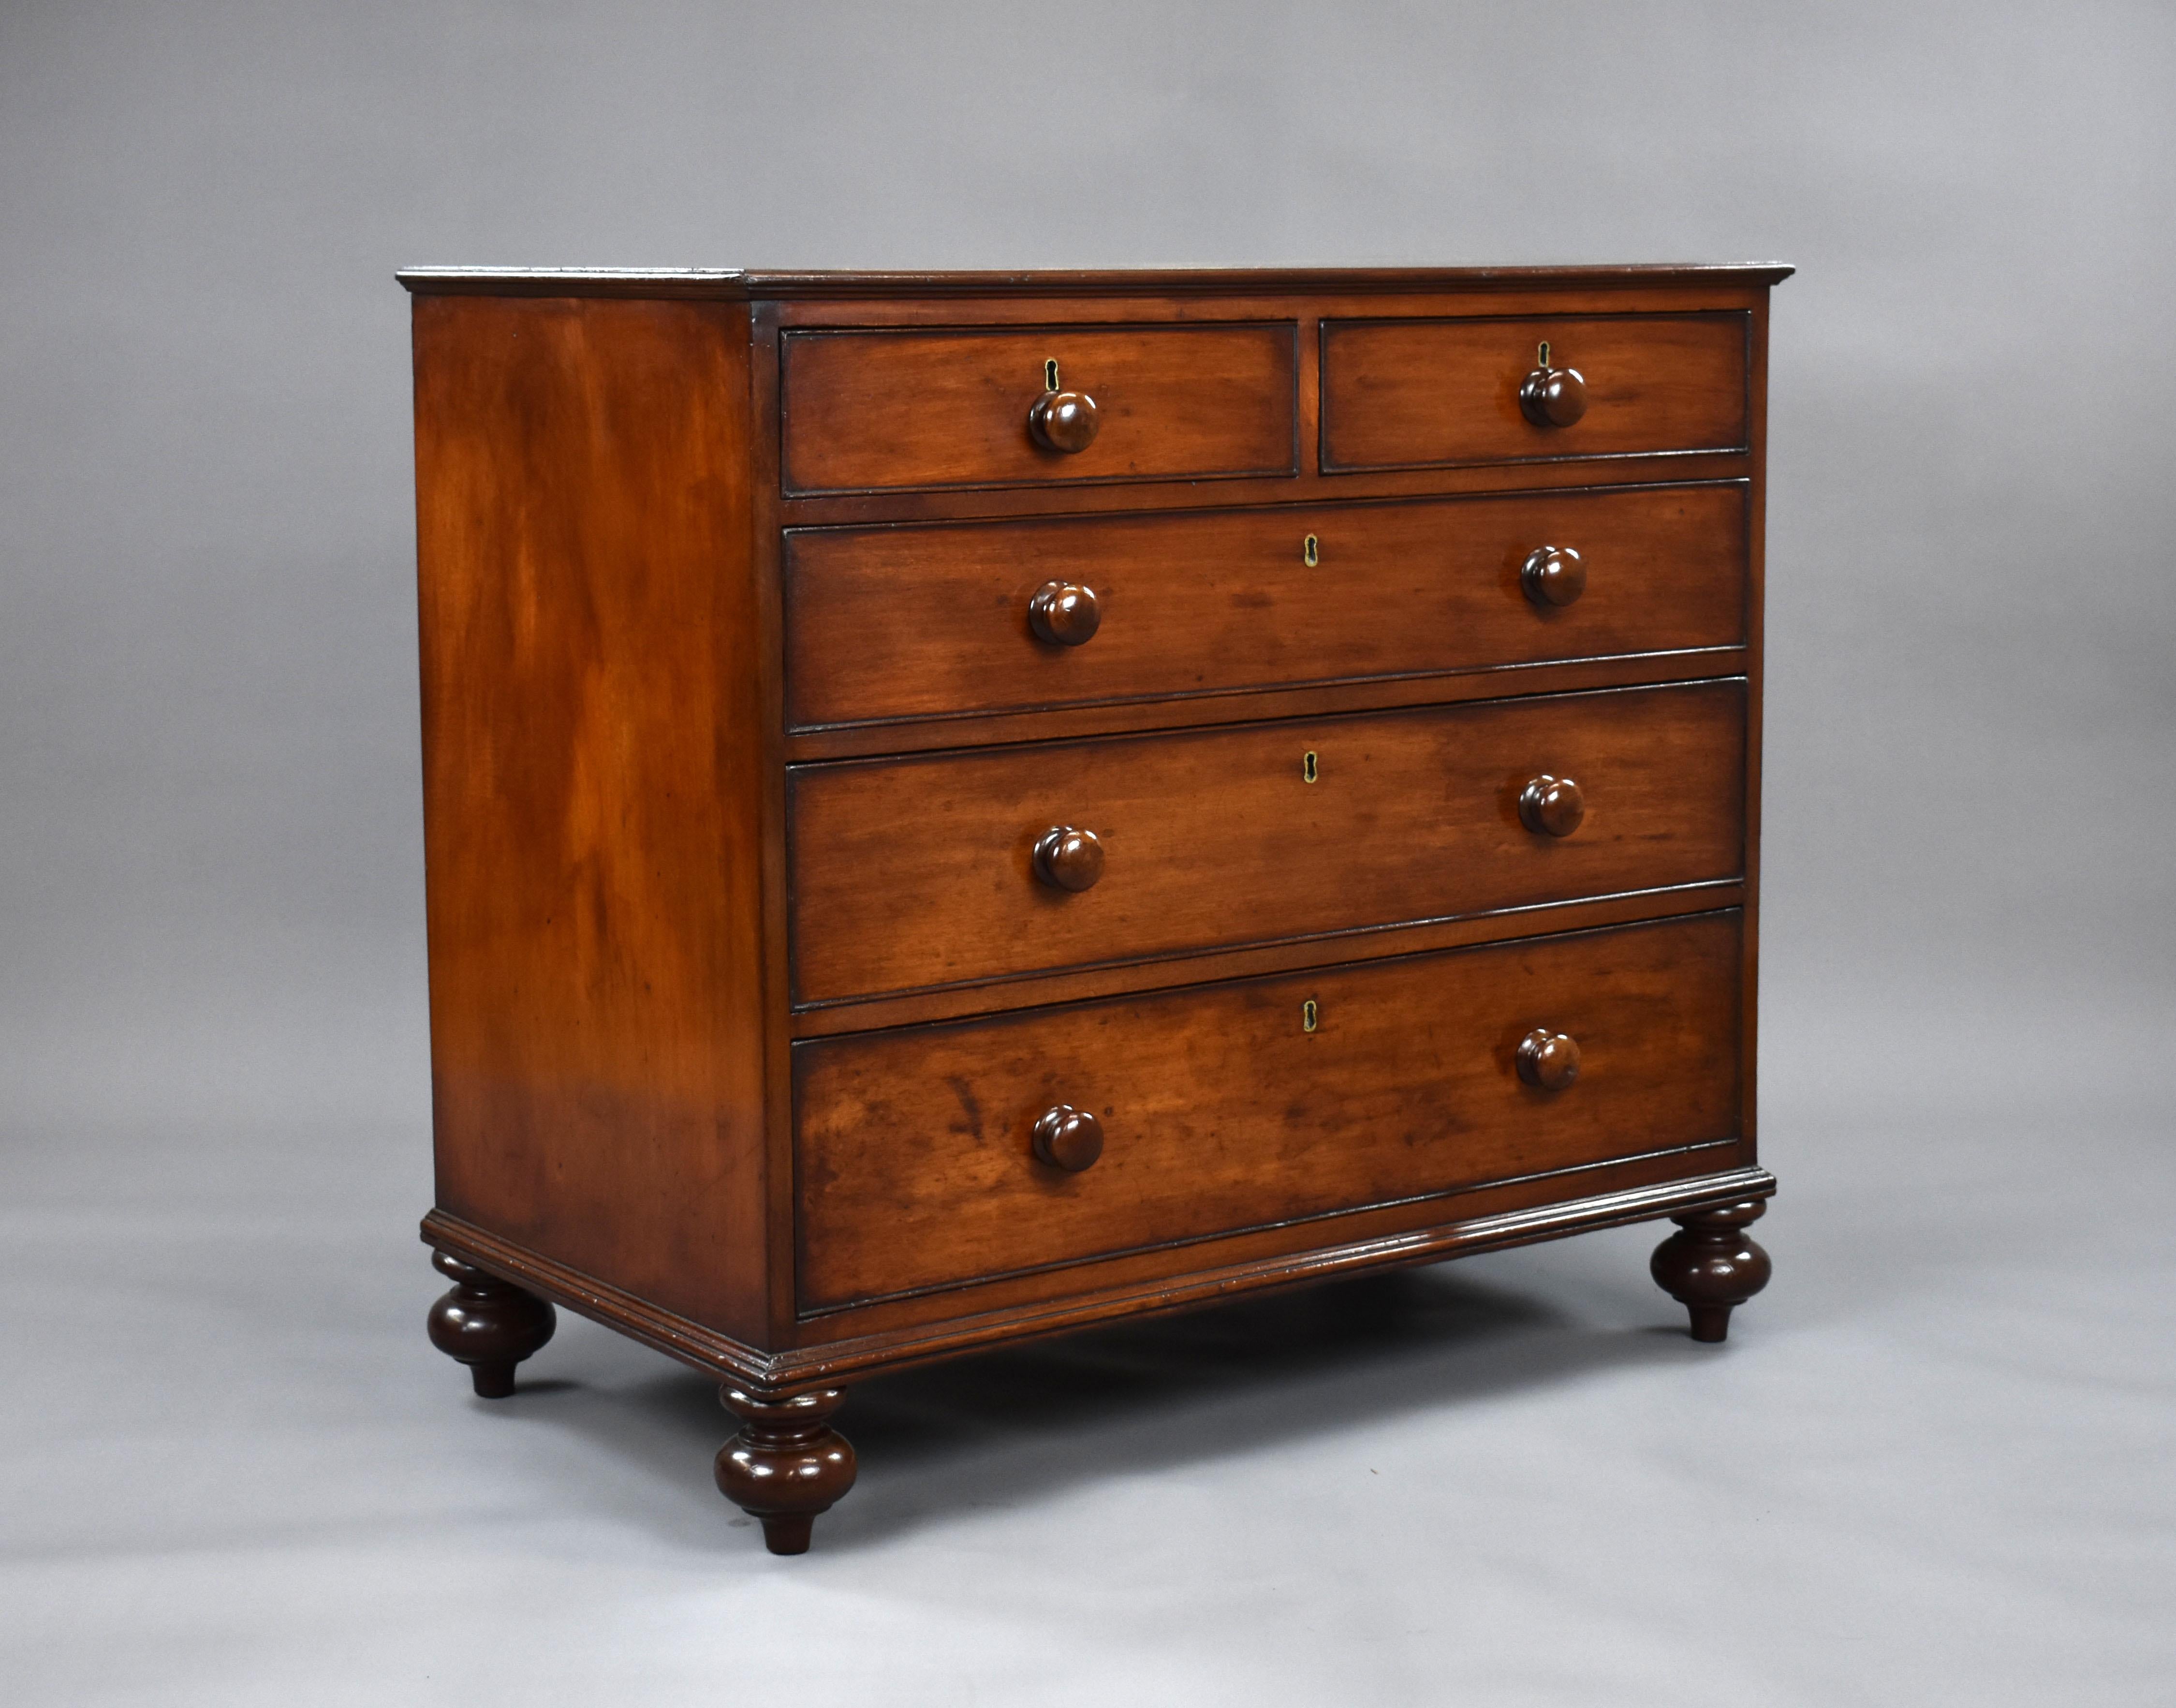 A good quality Victorian mahogany chest of drawers, having an arrangement of two short over three long graduated drawers, each with turned handles. The chest stands on turned feet and is in very good condition for its age. 

Measures: Width: 96cm